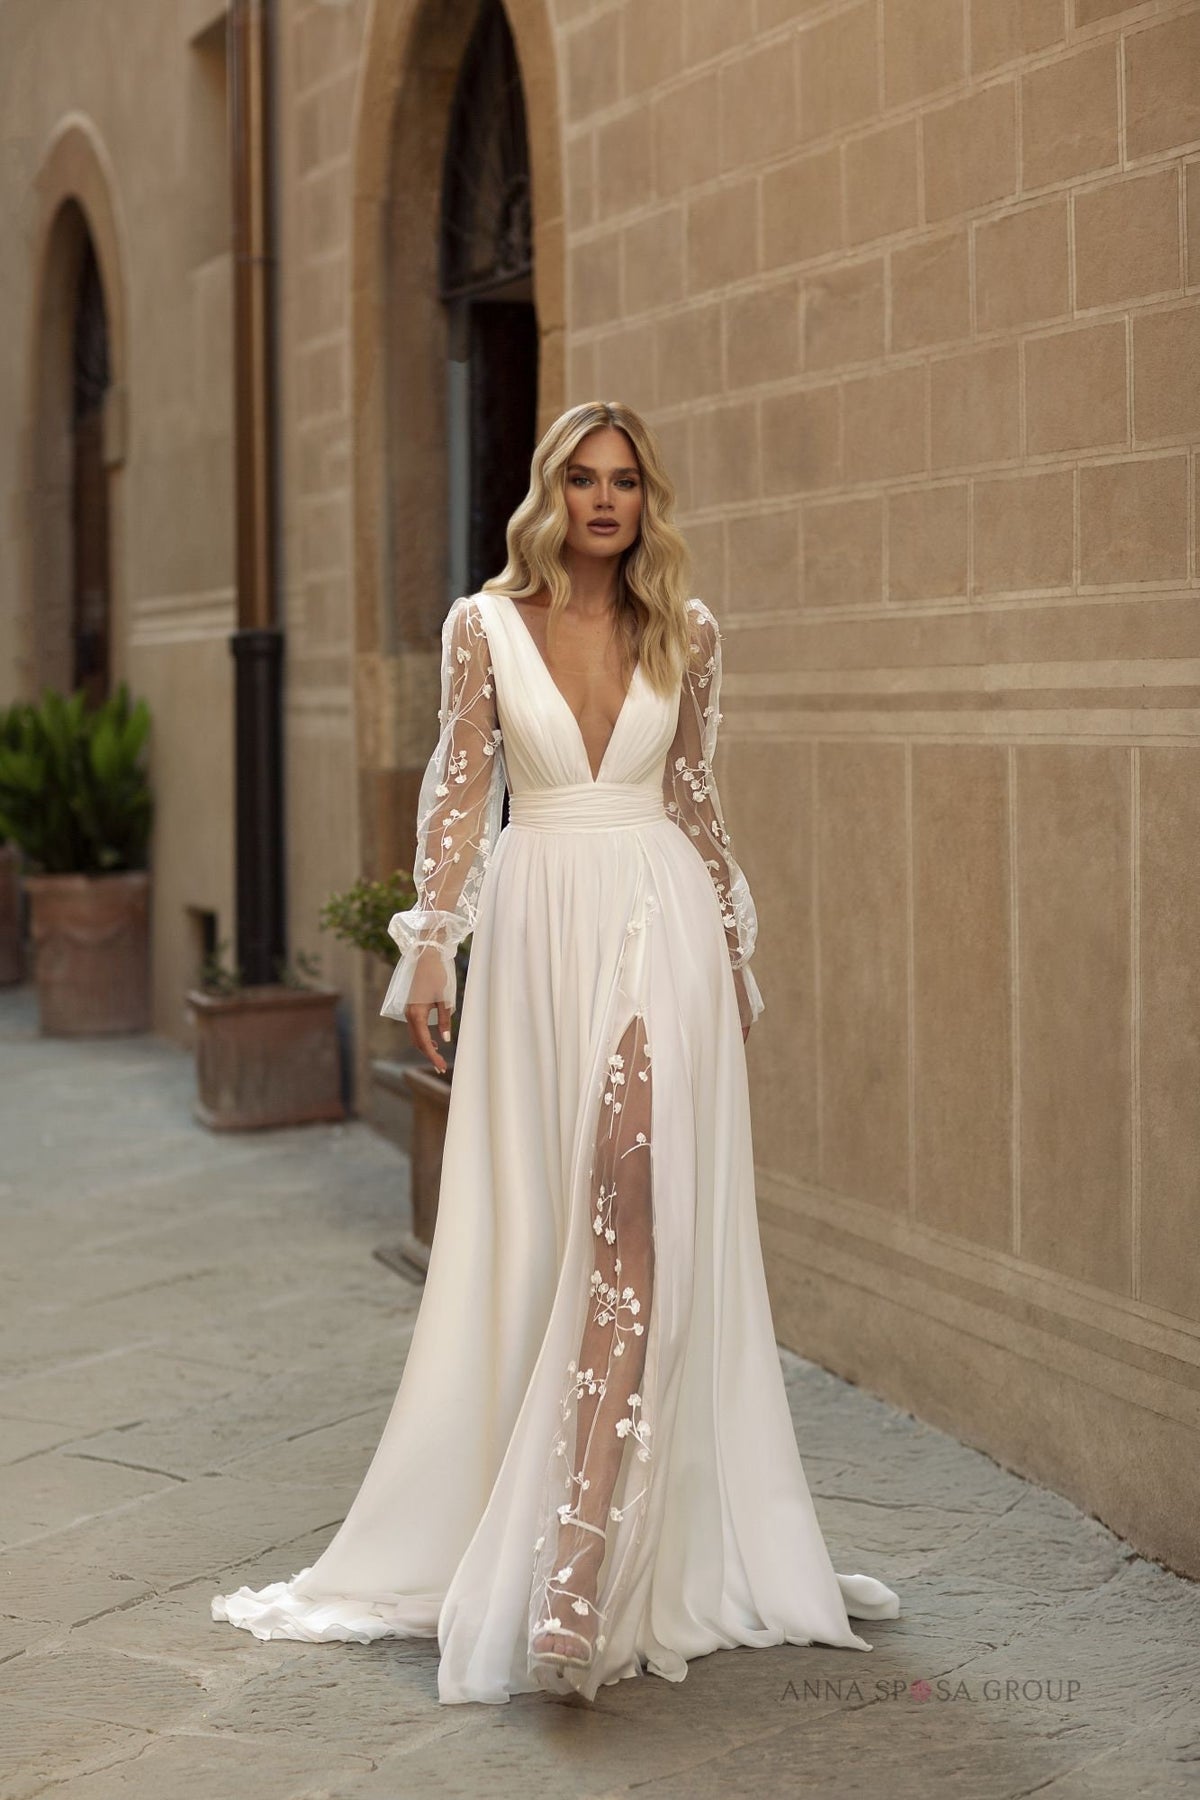 Classic ALine Floral Tattoo Lace Beach Tulle Long Sleeve Wedding Dress Bridal Gown Deep V Neckline Illusion Lace Open Back with Short Train